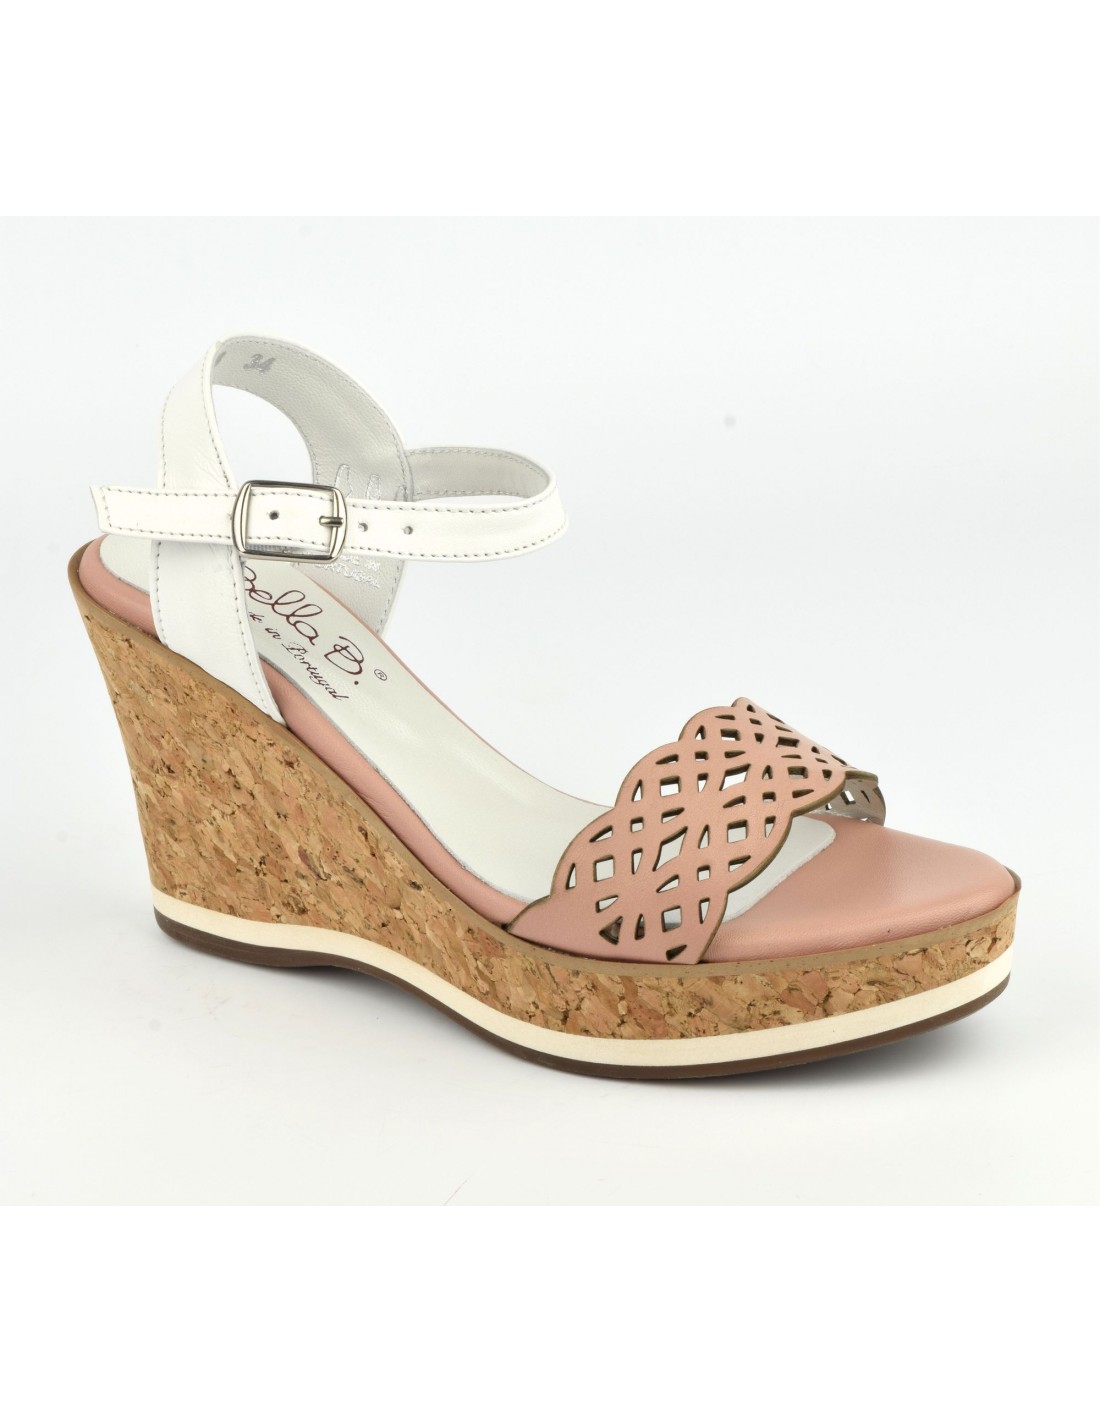 Pink nude leather sandals, cork leather 